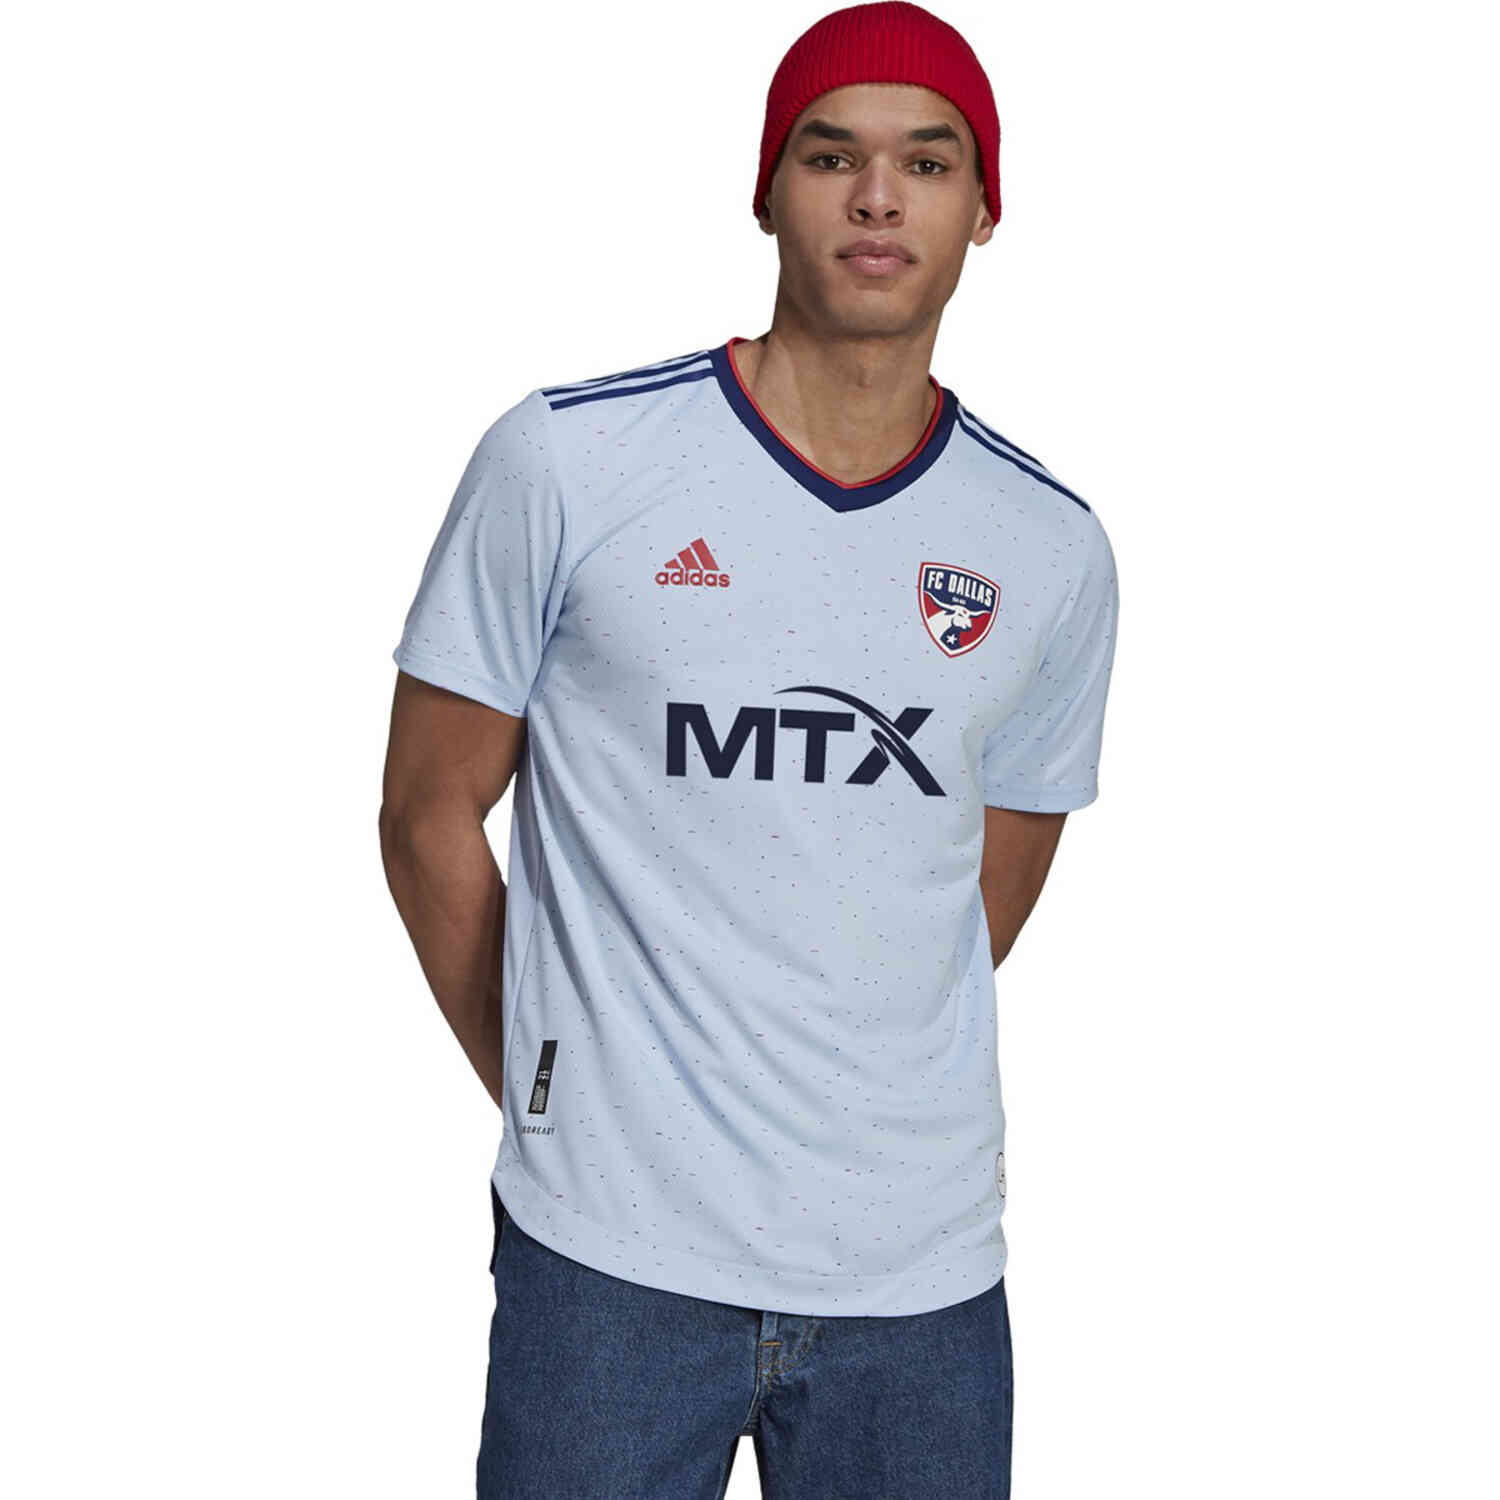 adidas FC Dallas 23/24 Away Authentic Jersey - White, Men's Soccer